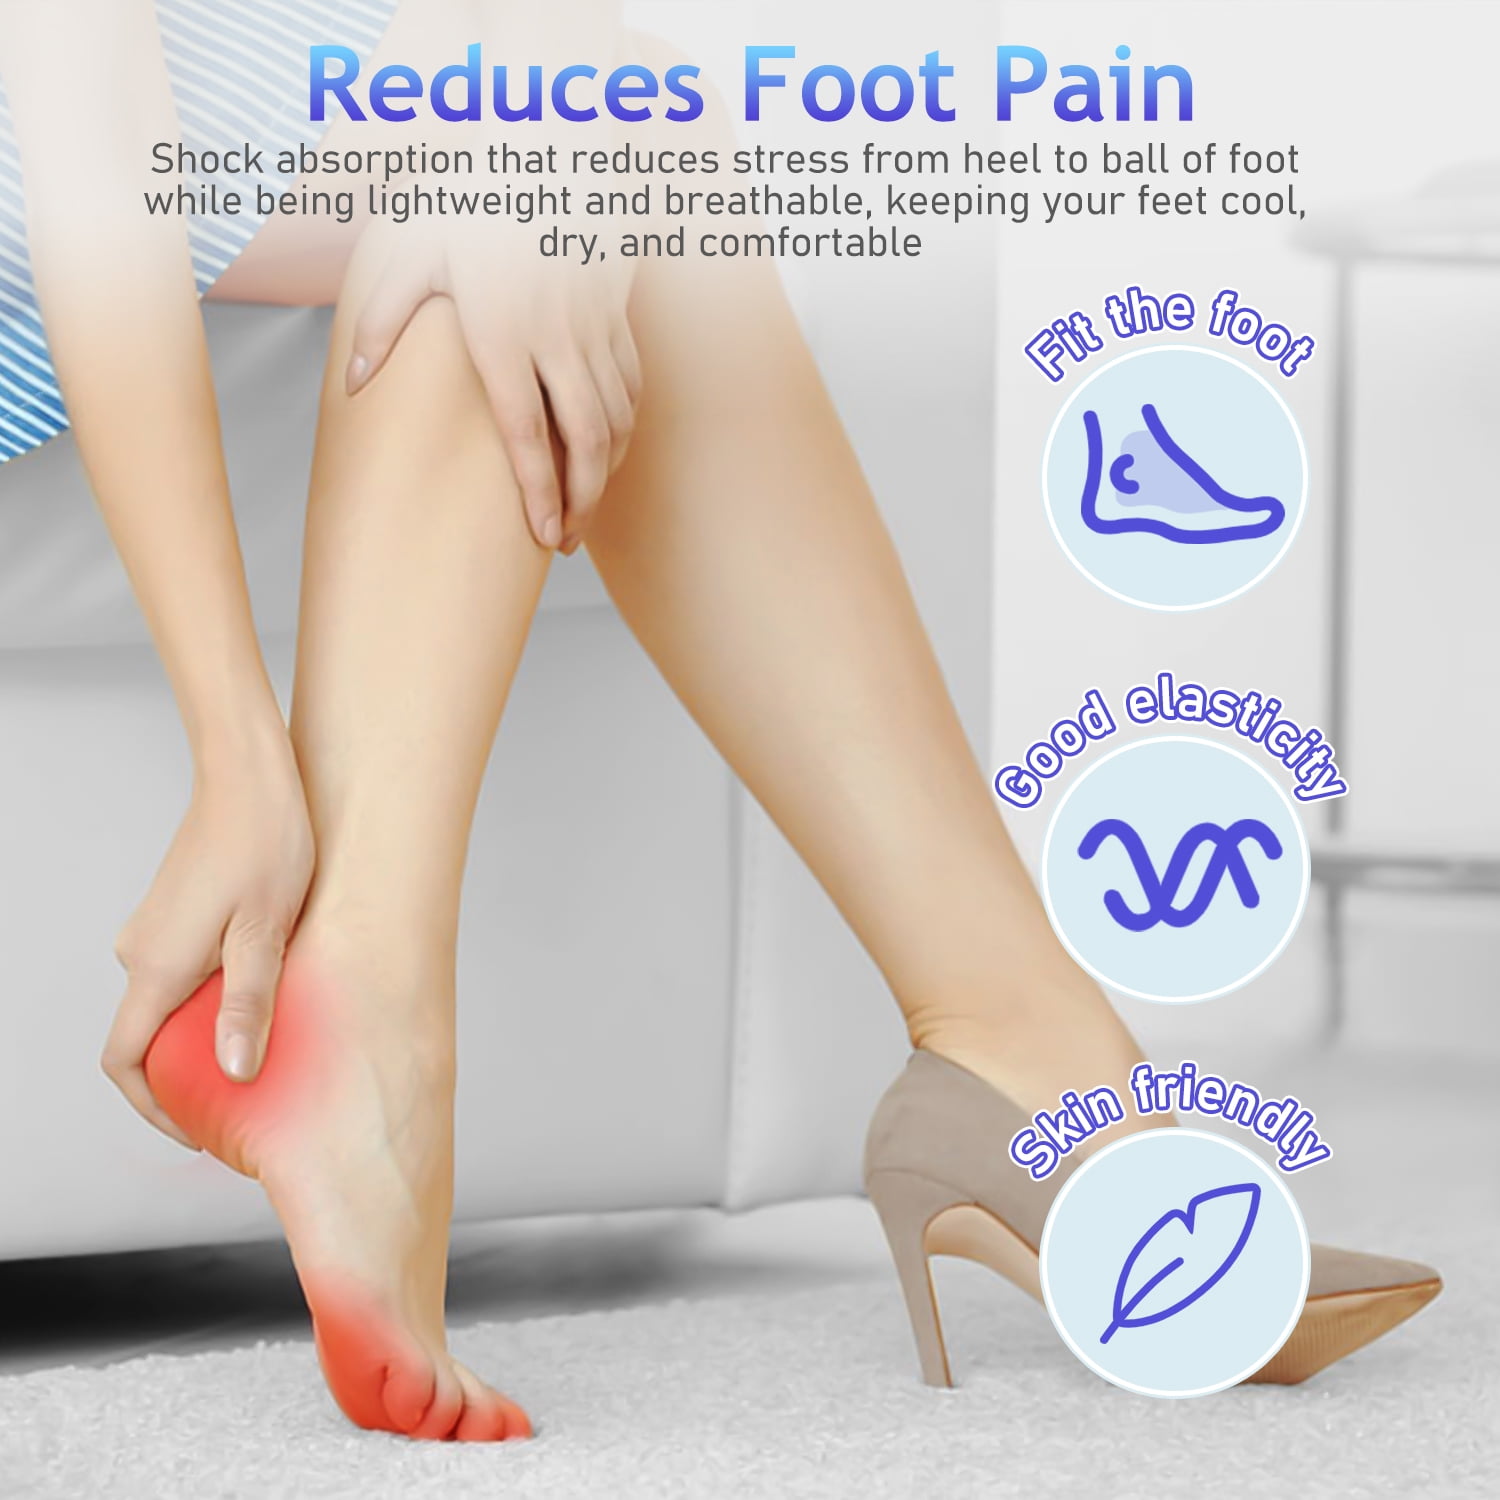 Amazon.com: Stand Strong Plantar Fasciitis Relief and Arch Support Inserts  for Women for High Heels Comfort | Gel Heel Pads, Metatarsal, Heel  Protectors & Insoles for Ball of Foot Pain | (Liquidation) :